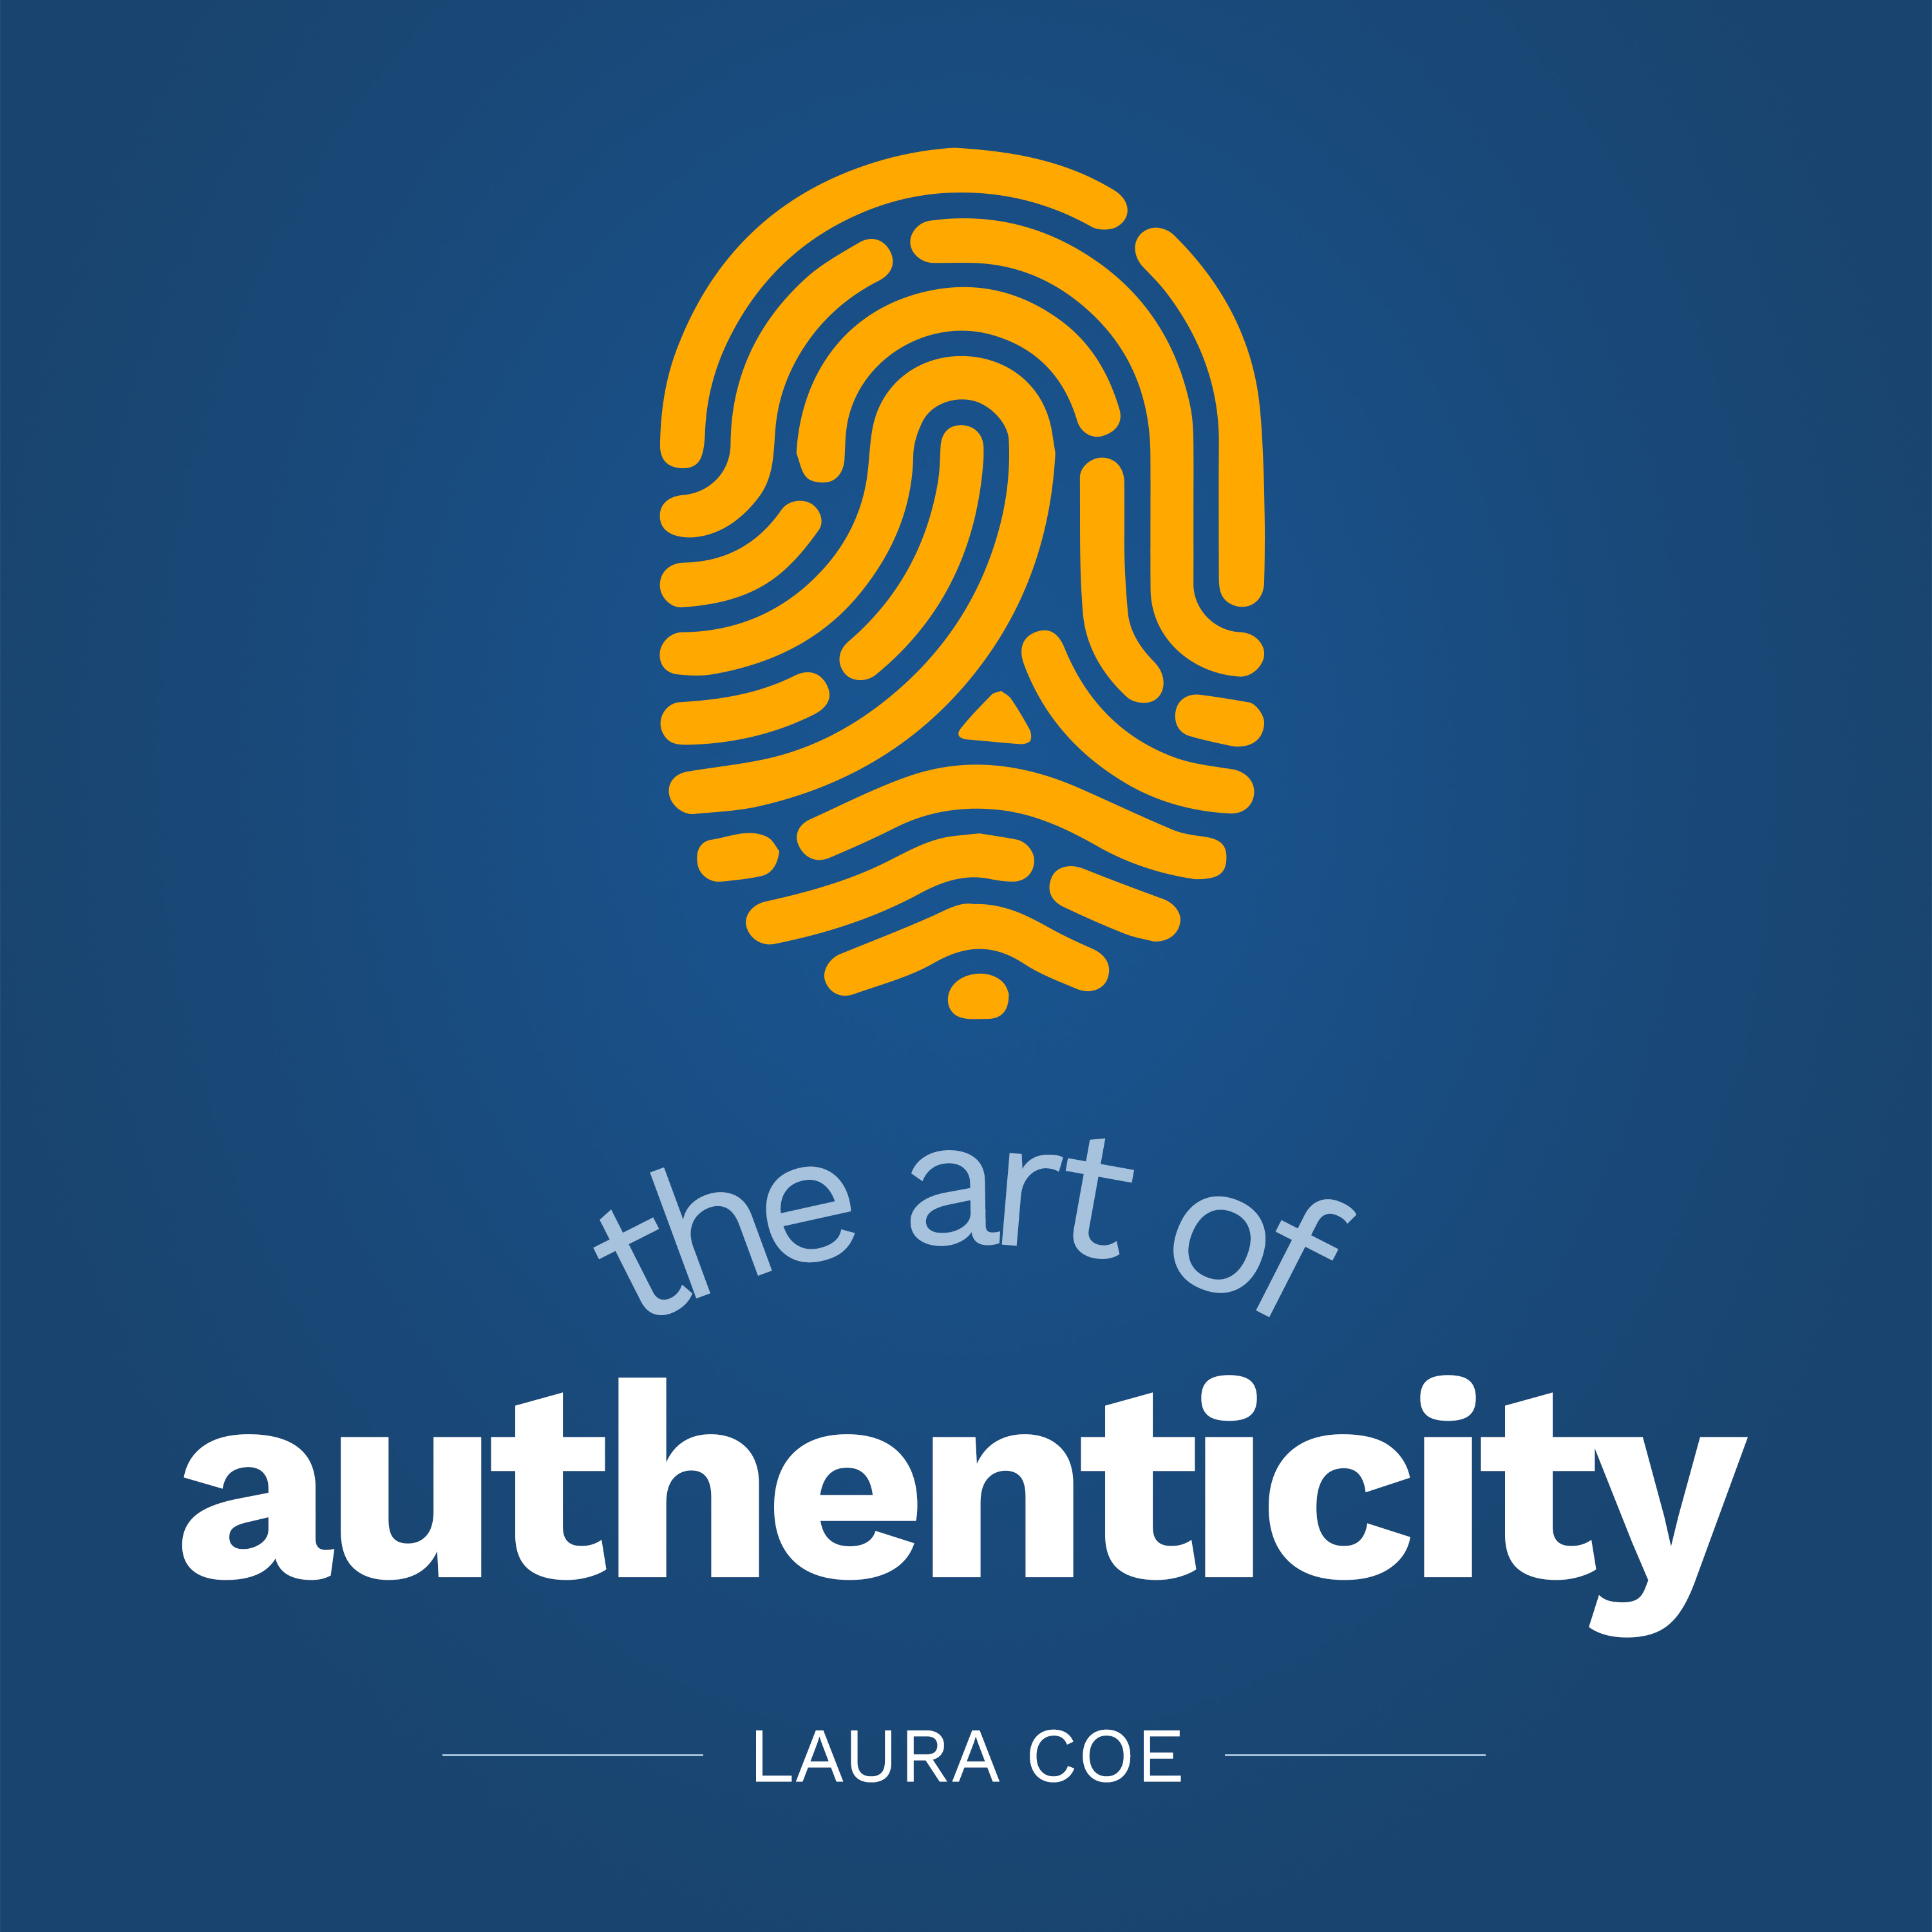 Laura Coe: On Love, On Spirituality, and On Finding Deeper Purpose